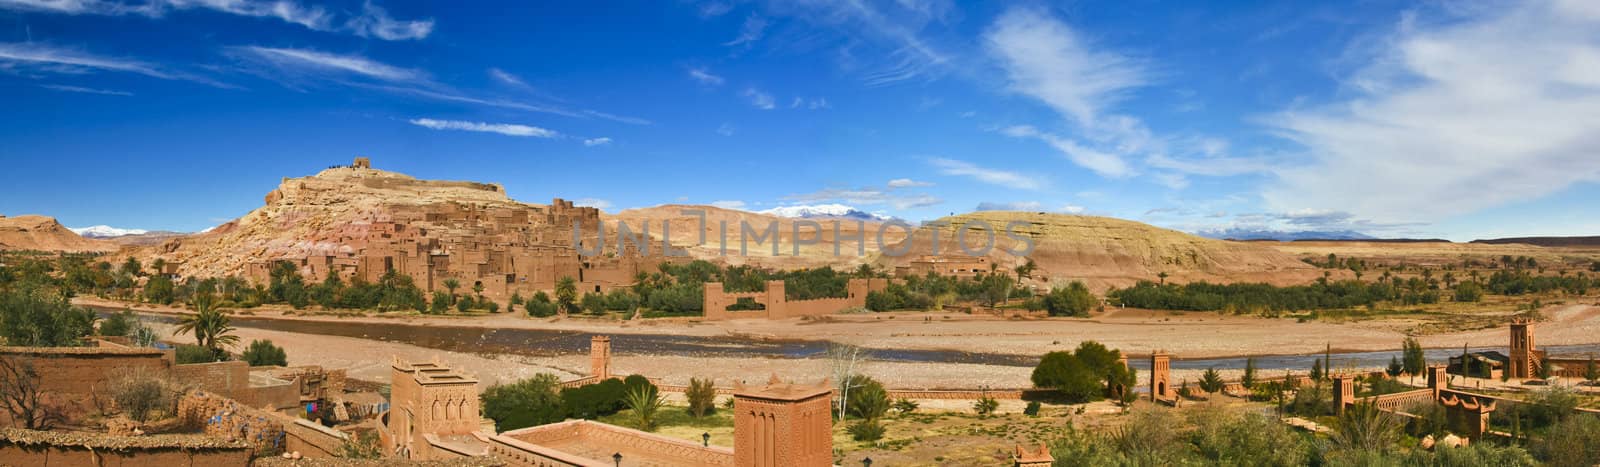 Panorama of the ancient moroccan kasbah Ait Benhaddou, near Ouarzazate - Unesco world heritage. Snow covered Atlas mountains can be seen in the background.